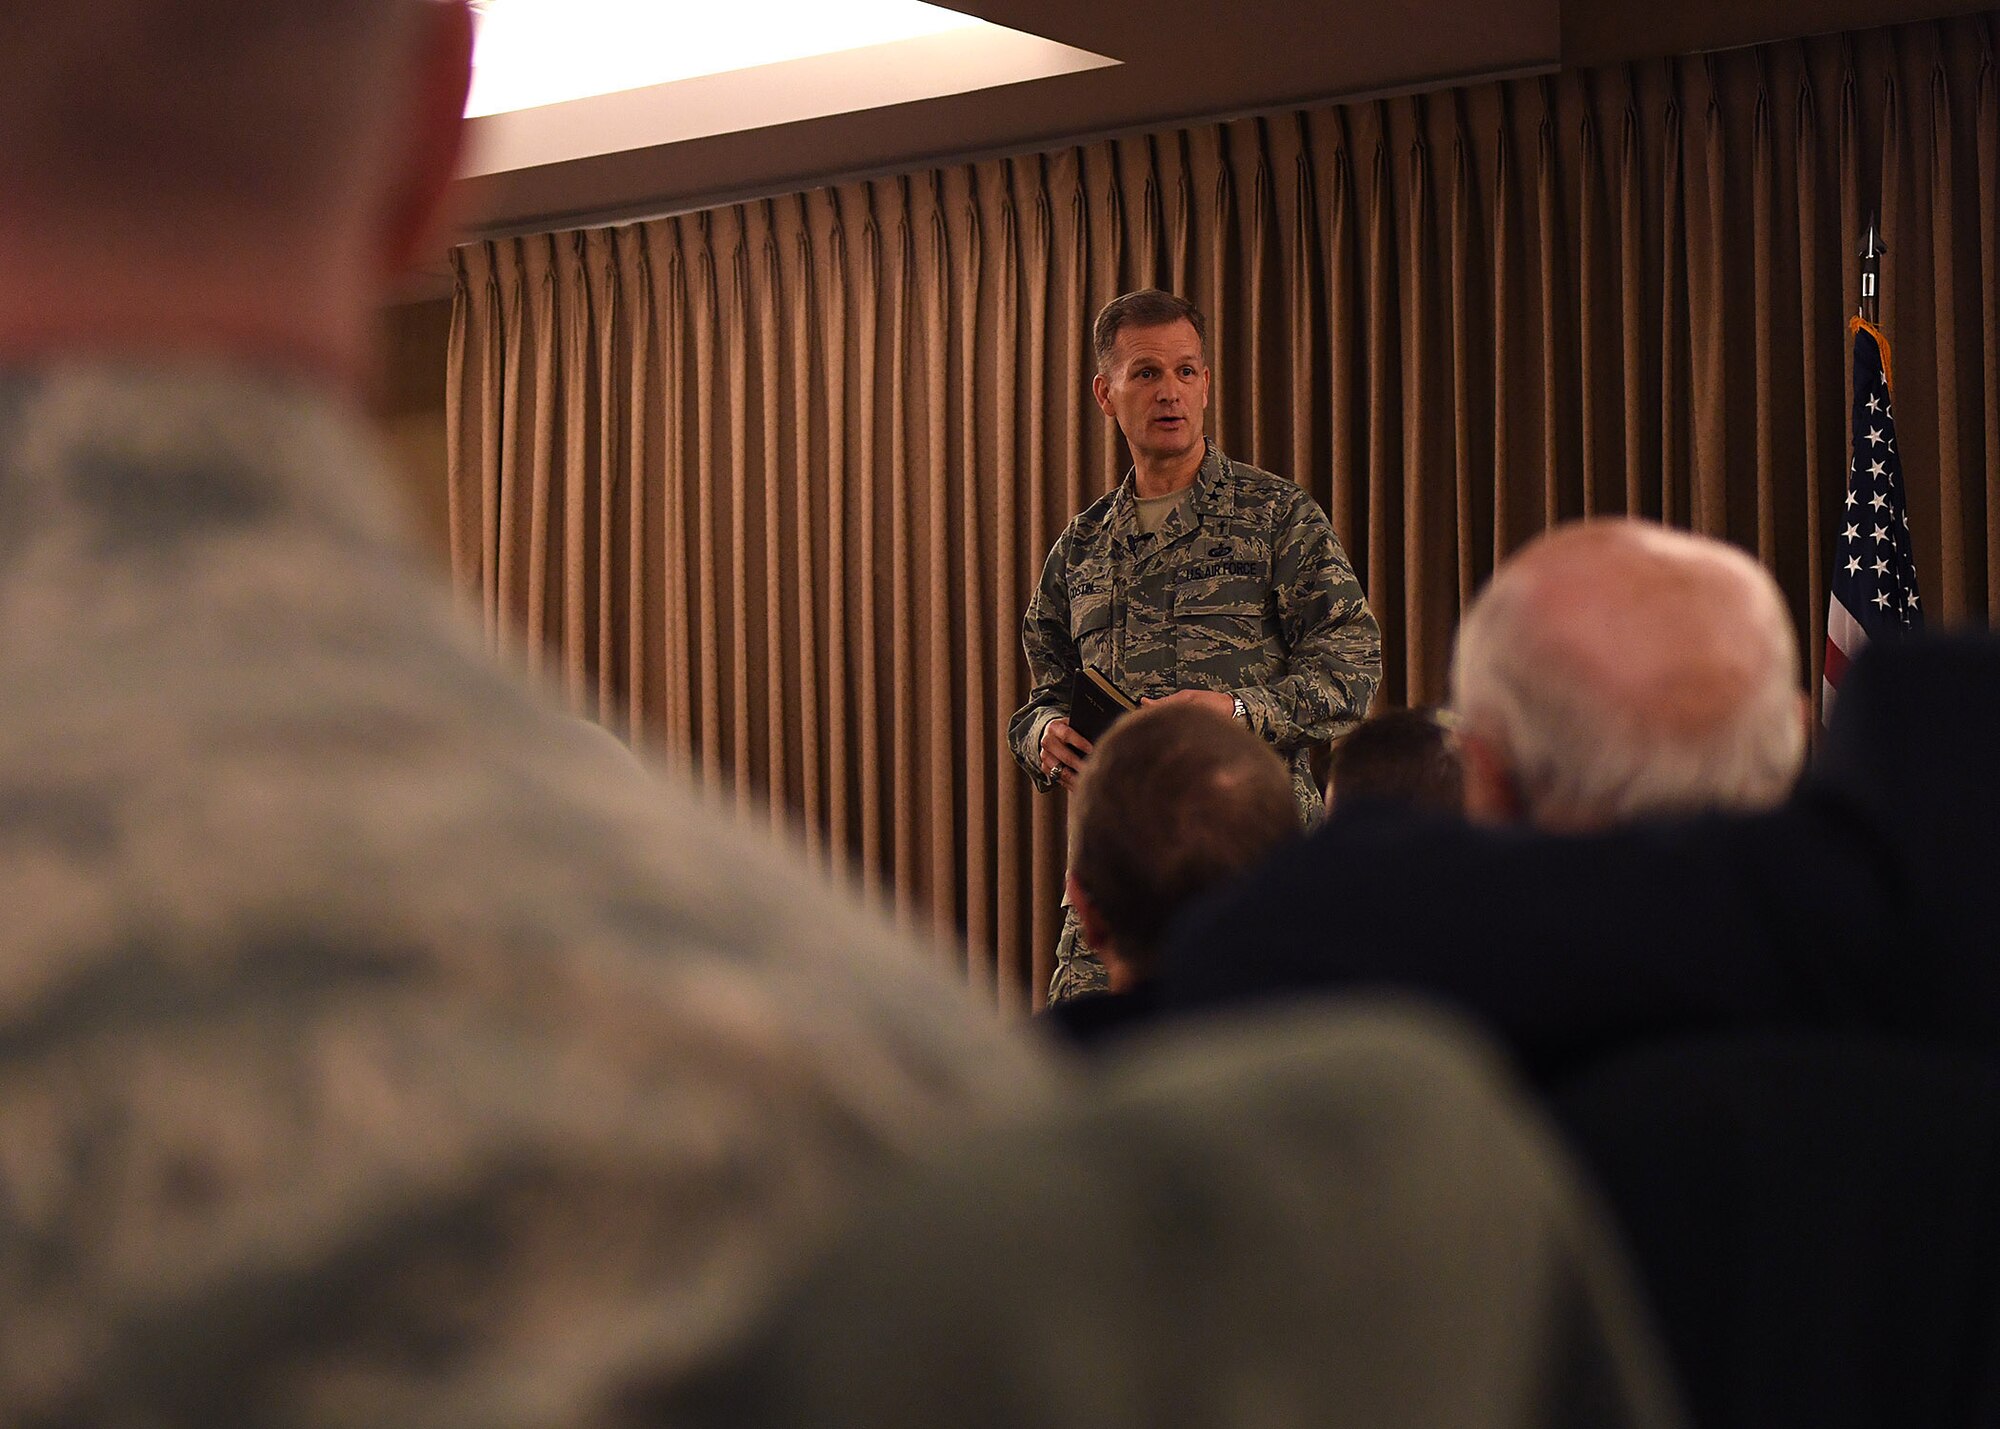 Maj. Gen. Dondi E. Costin, U.S. Air Force Chief of Chaplains, speaks at the National Prayer breakfast Feb. 16, 2017, on Grand Forks Air Force Base, North Dakota. Costin spent two days in North Dakota speaking with Airmen from Grand Forks AFB and Cavalier Air Force Station about spiritual fitness. (U.S. Air Force photo by Senior Airman Ryan Sparks)